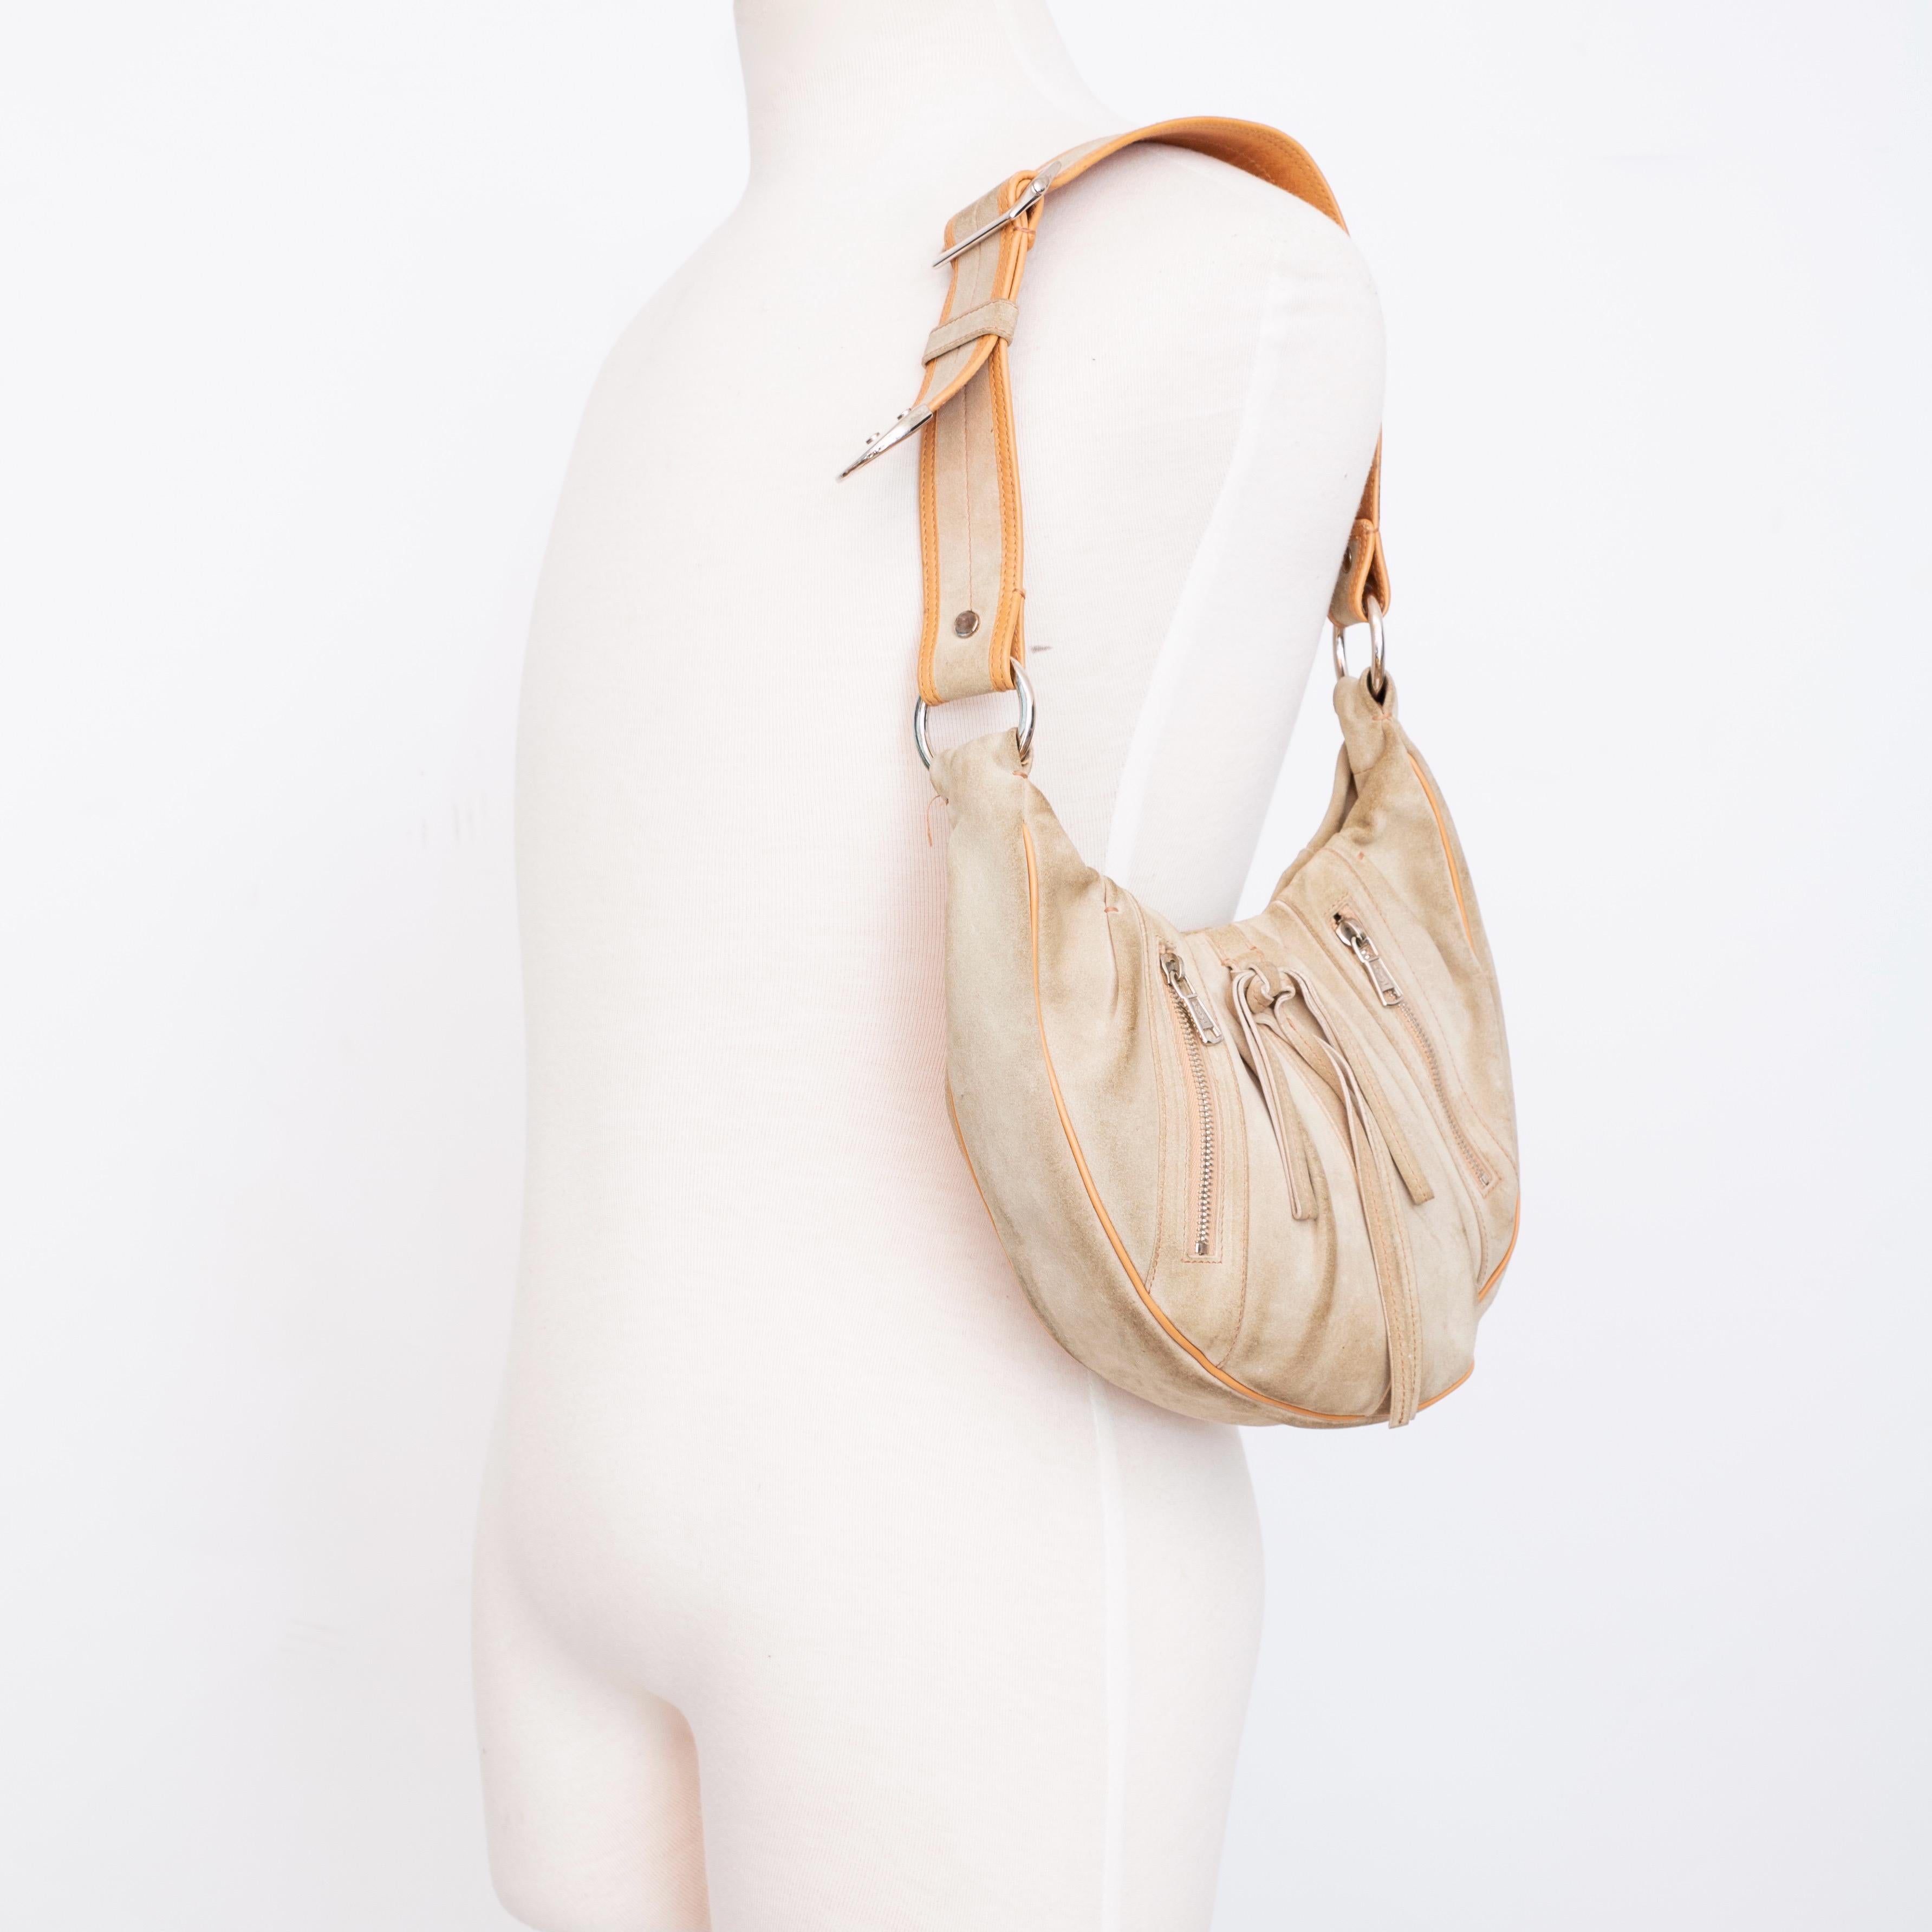 This vintage YSL hobo bag comes in an aged beige colour, with brown contrasting stitching throughout. Featuring sliver hardware, snap closure and a black interior with a zip pocket.

COLOR: Beige
MATERIAL: Suede
ITEM CODE: 120436 001998
MEASURES: H